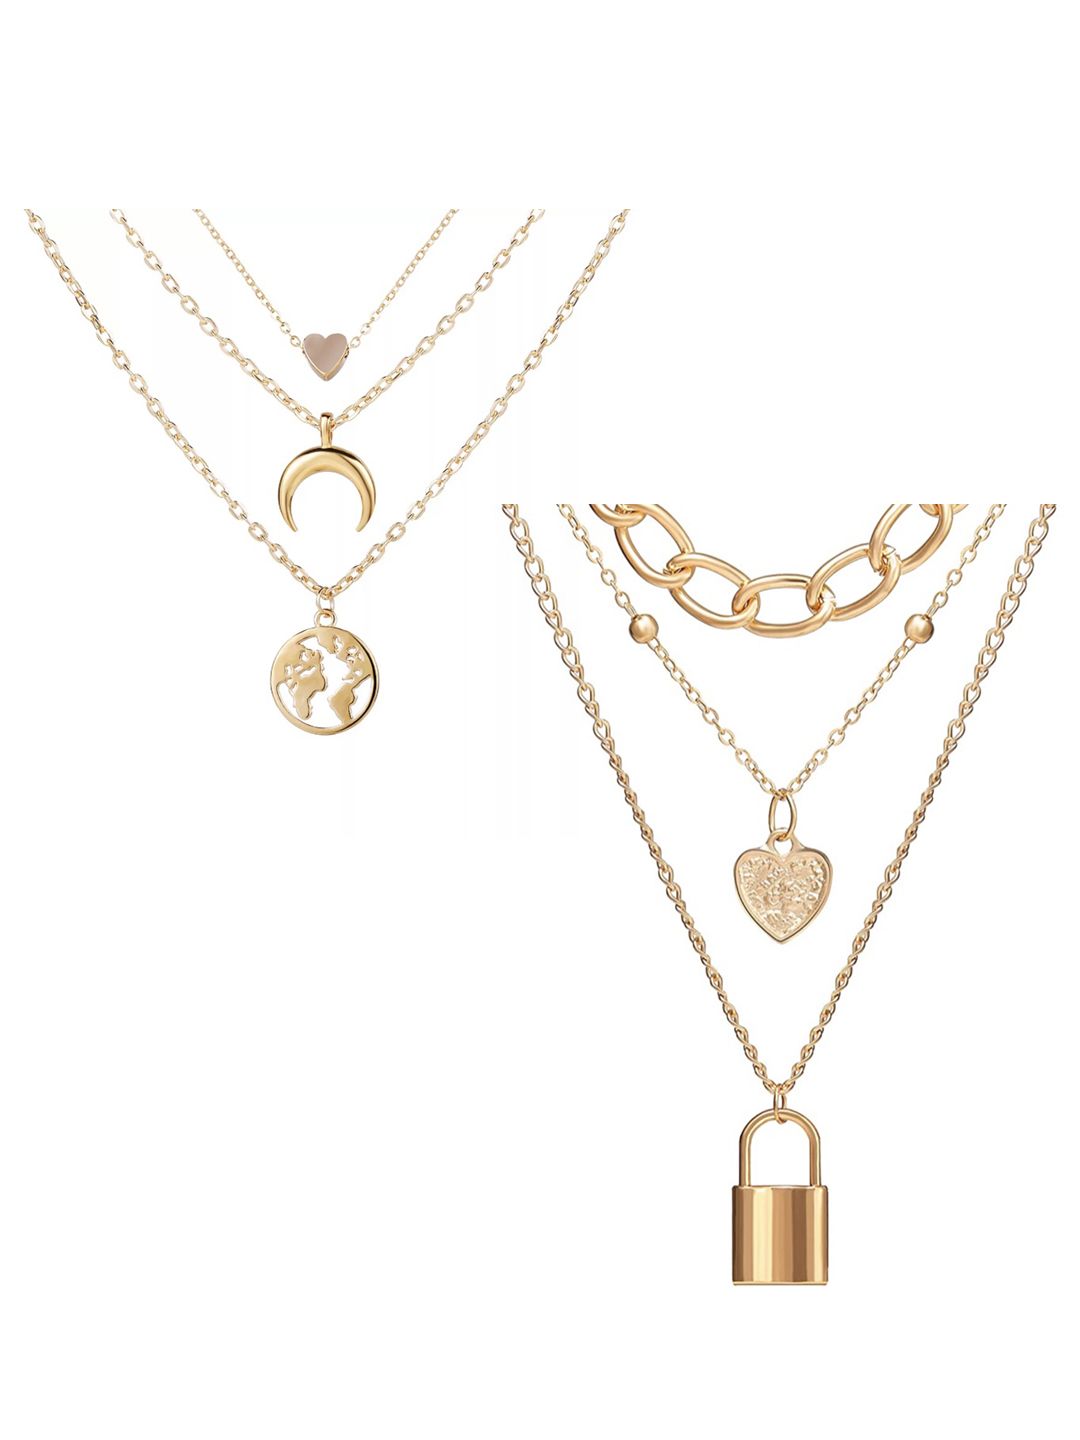 Vembley Set of 2 Gold-Plated Layered Necklaces Price in India